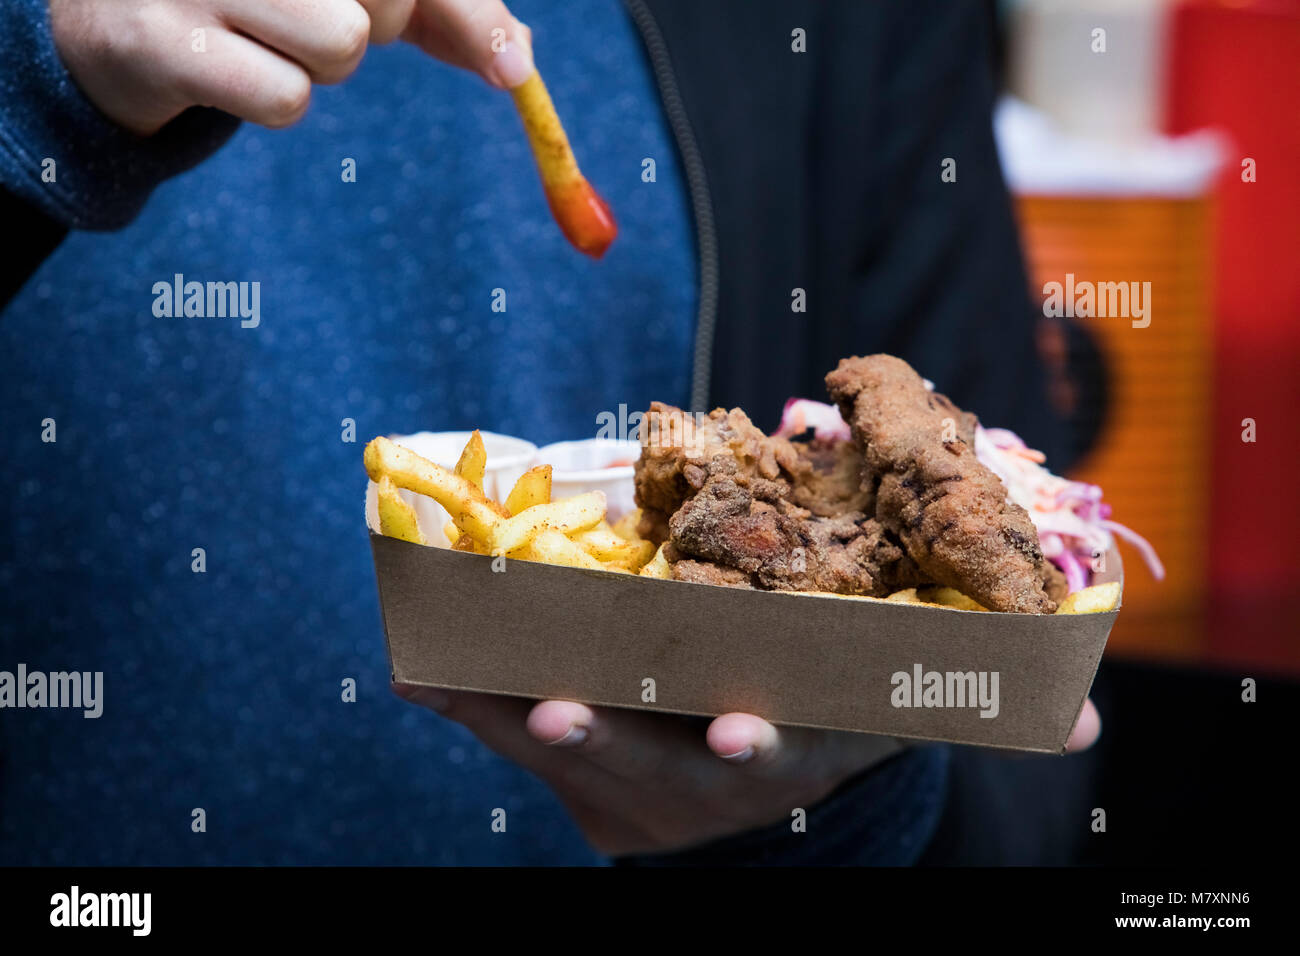 Man dipping chip in ketchup on takeaway tray. Stock Photo